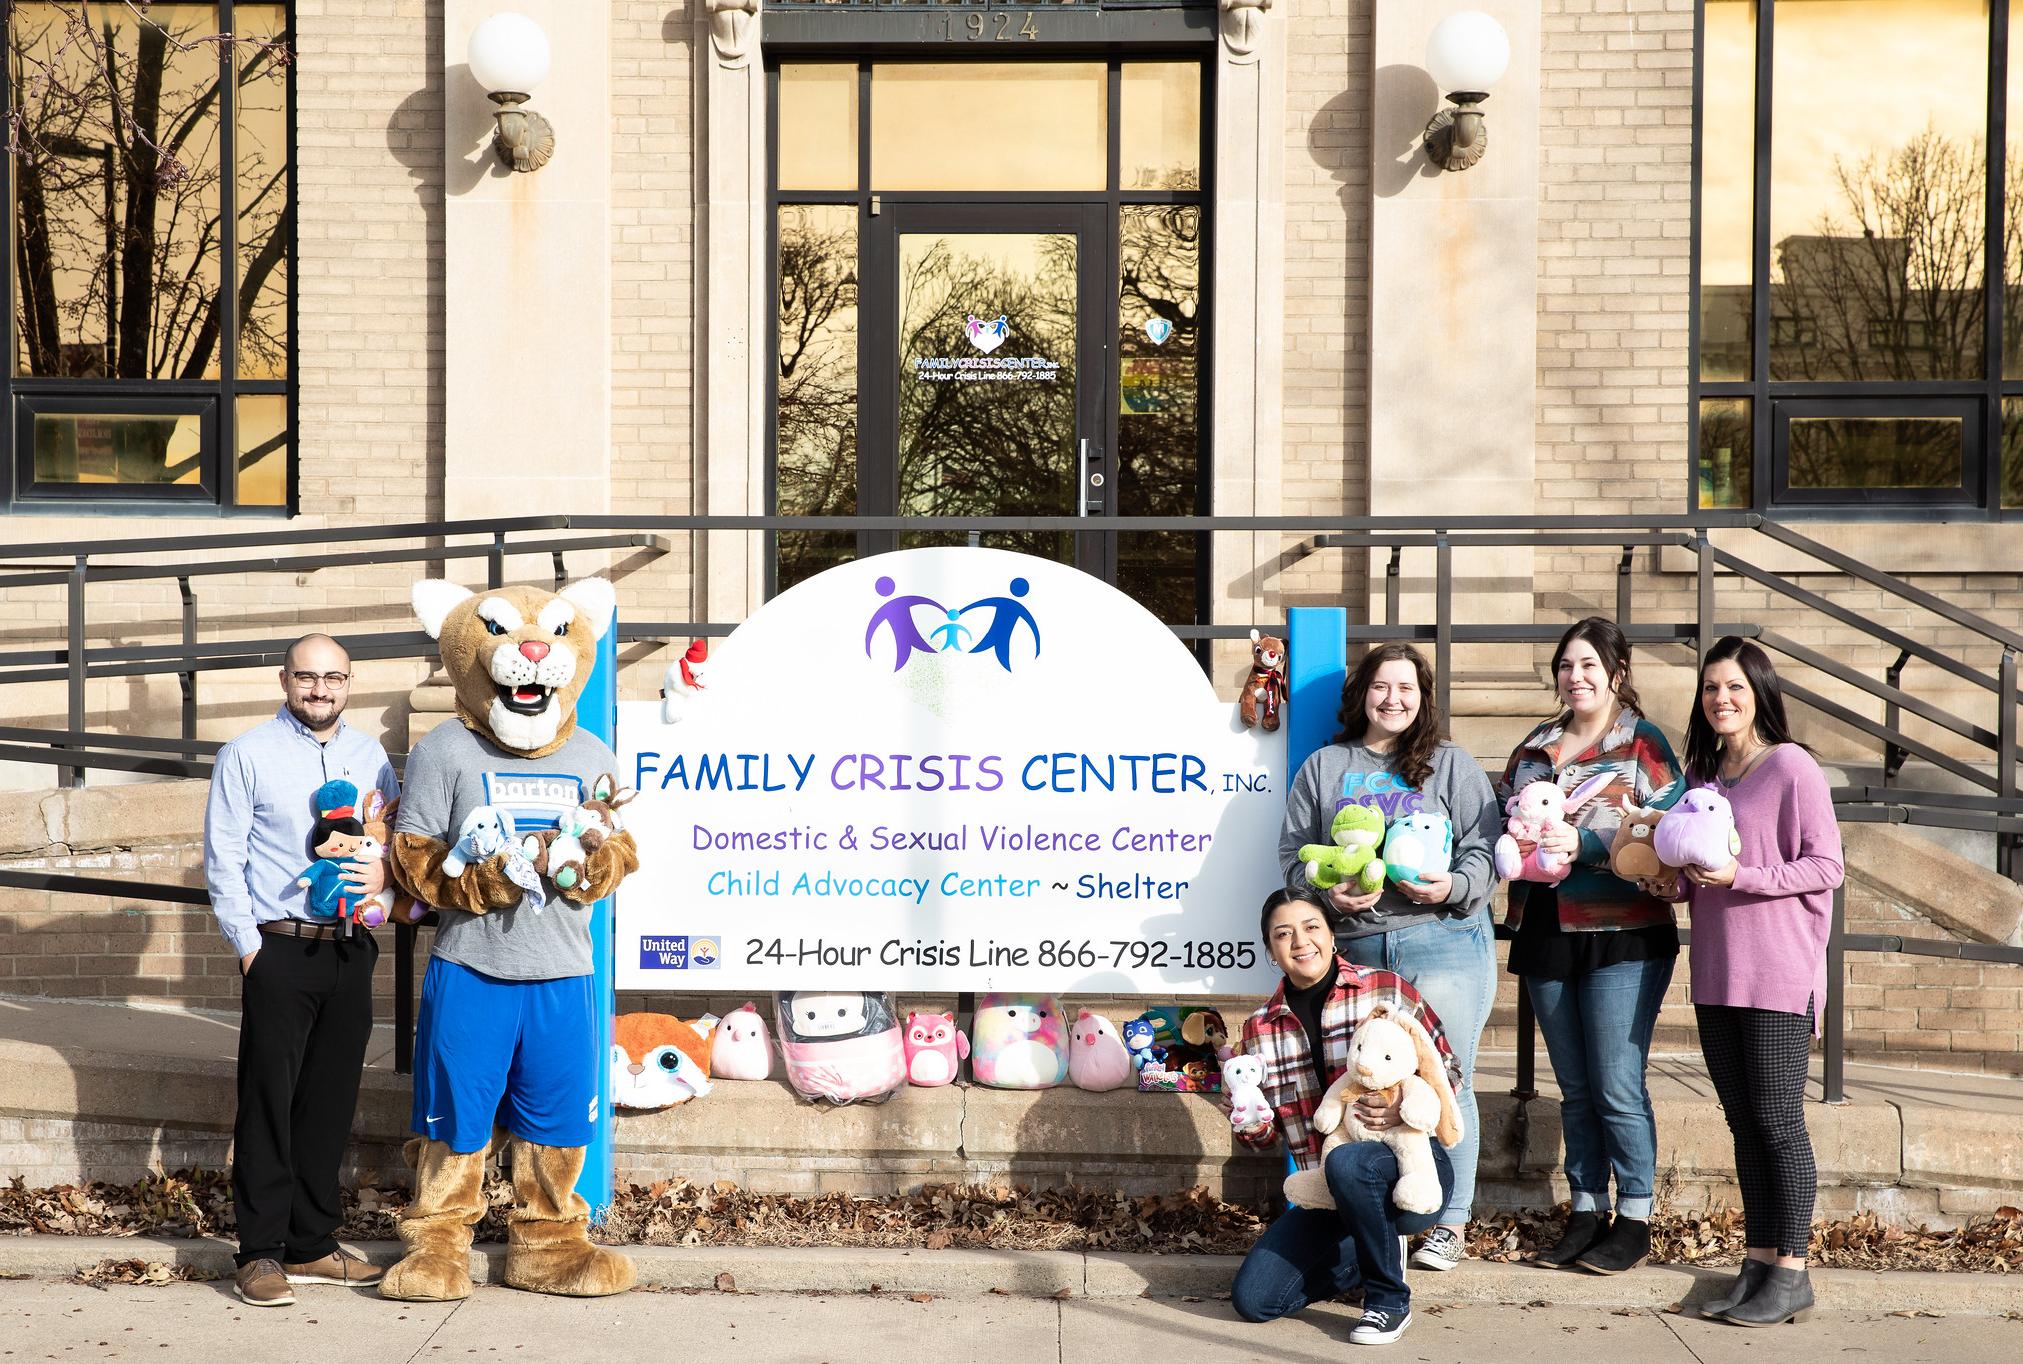 people standing in front of the family crisis center sign with stuffed animals